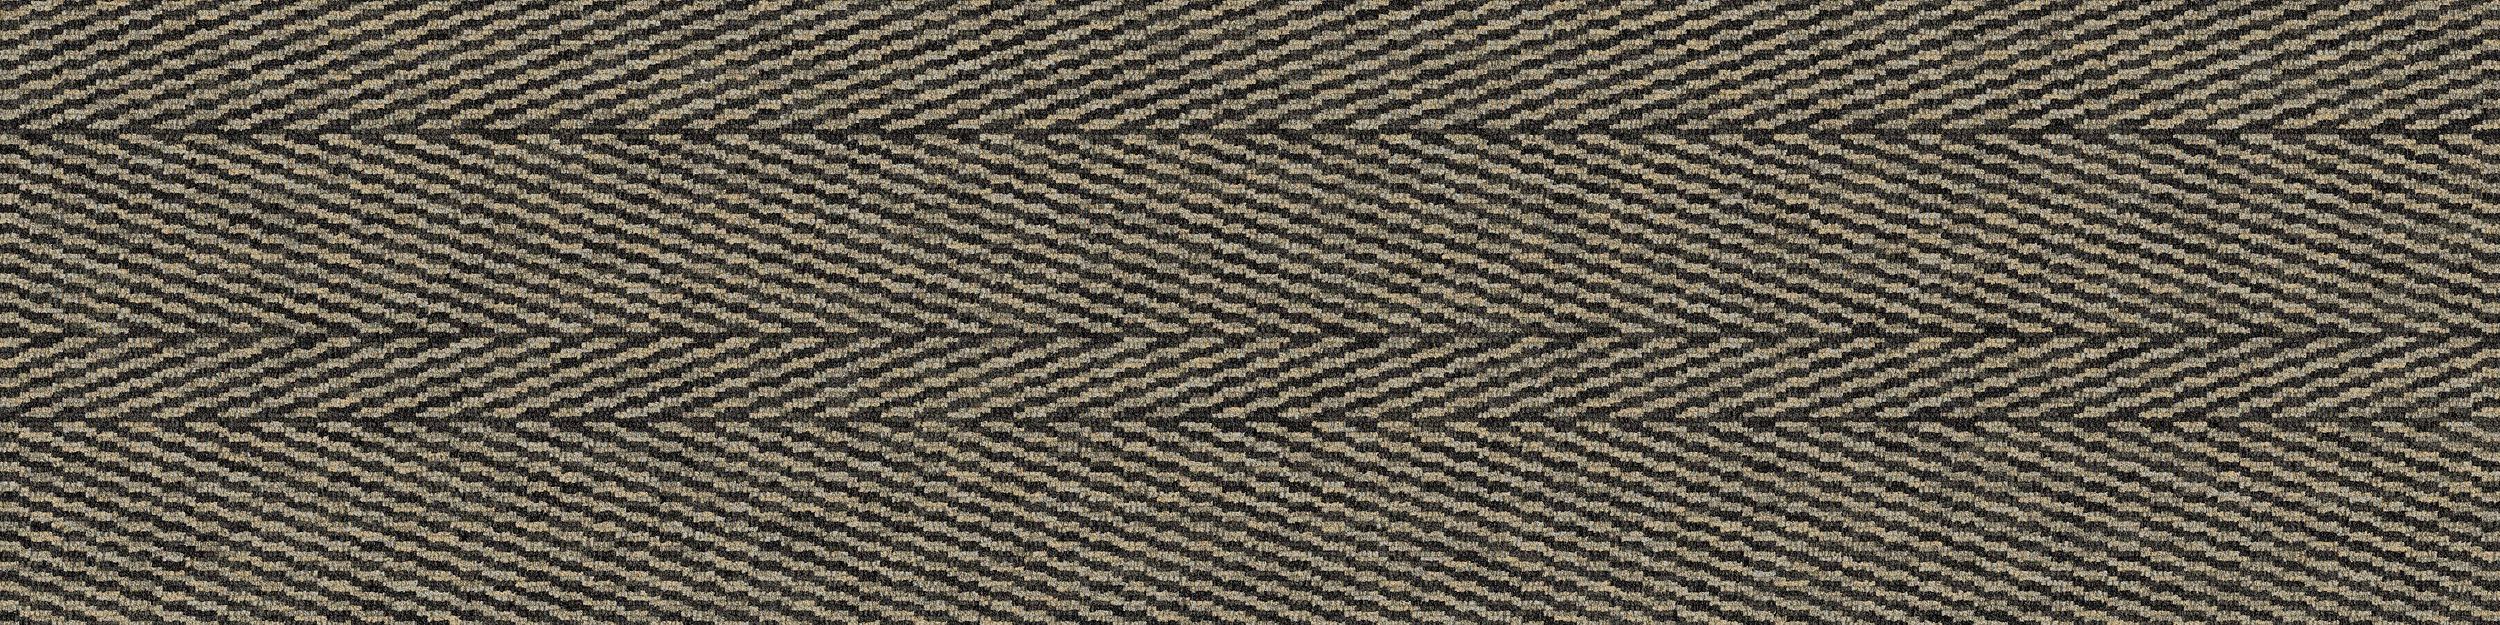 Stitch In Time Carpet Tile In Natural Stitch image number 2